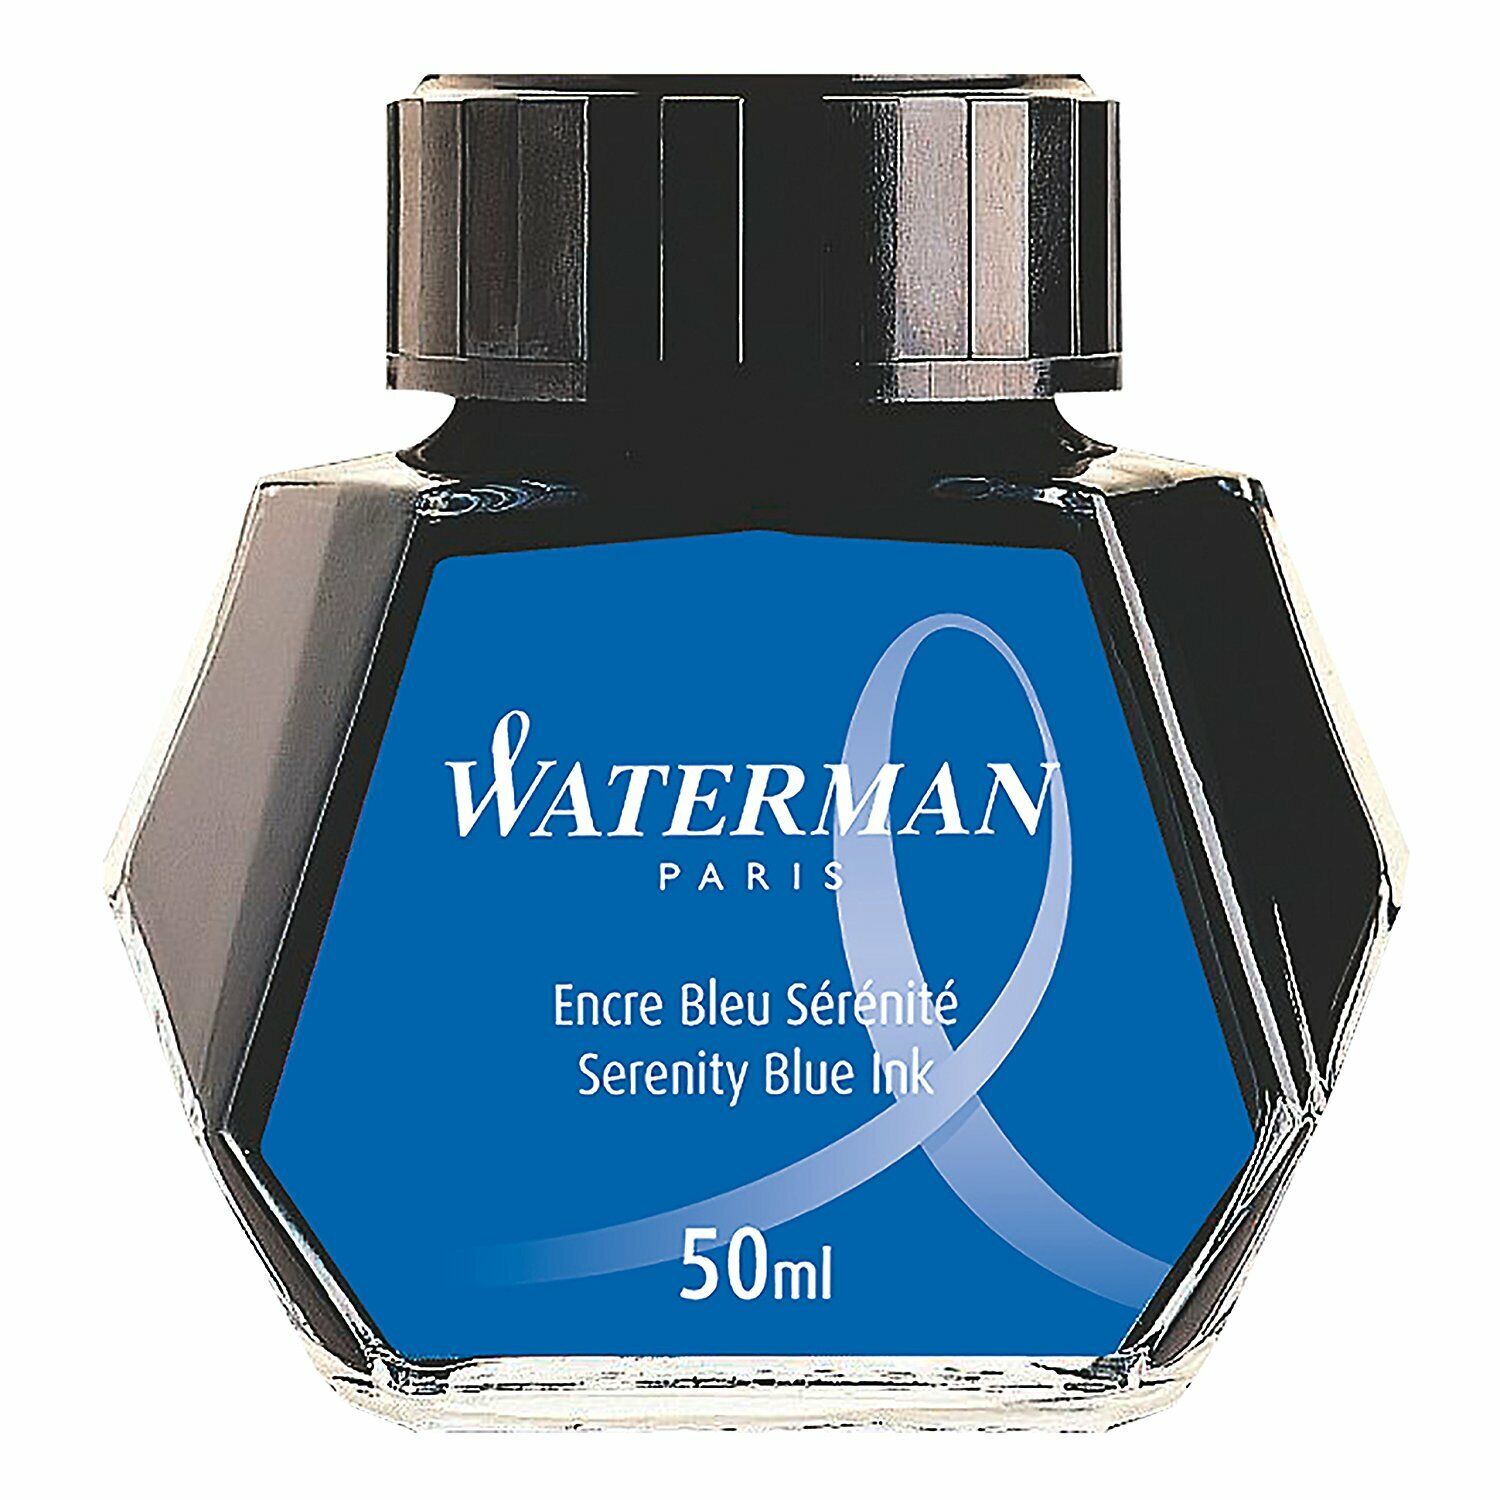 Waterman Bottled Ink for Fountain Pens in Serenity Blue - 50mL - NEW 51060W2